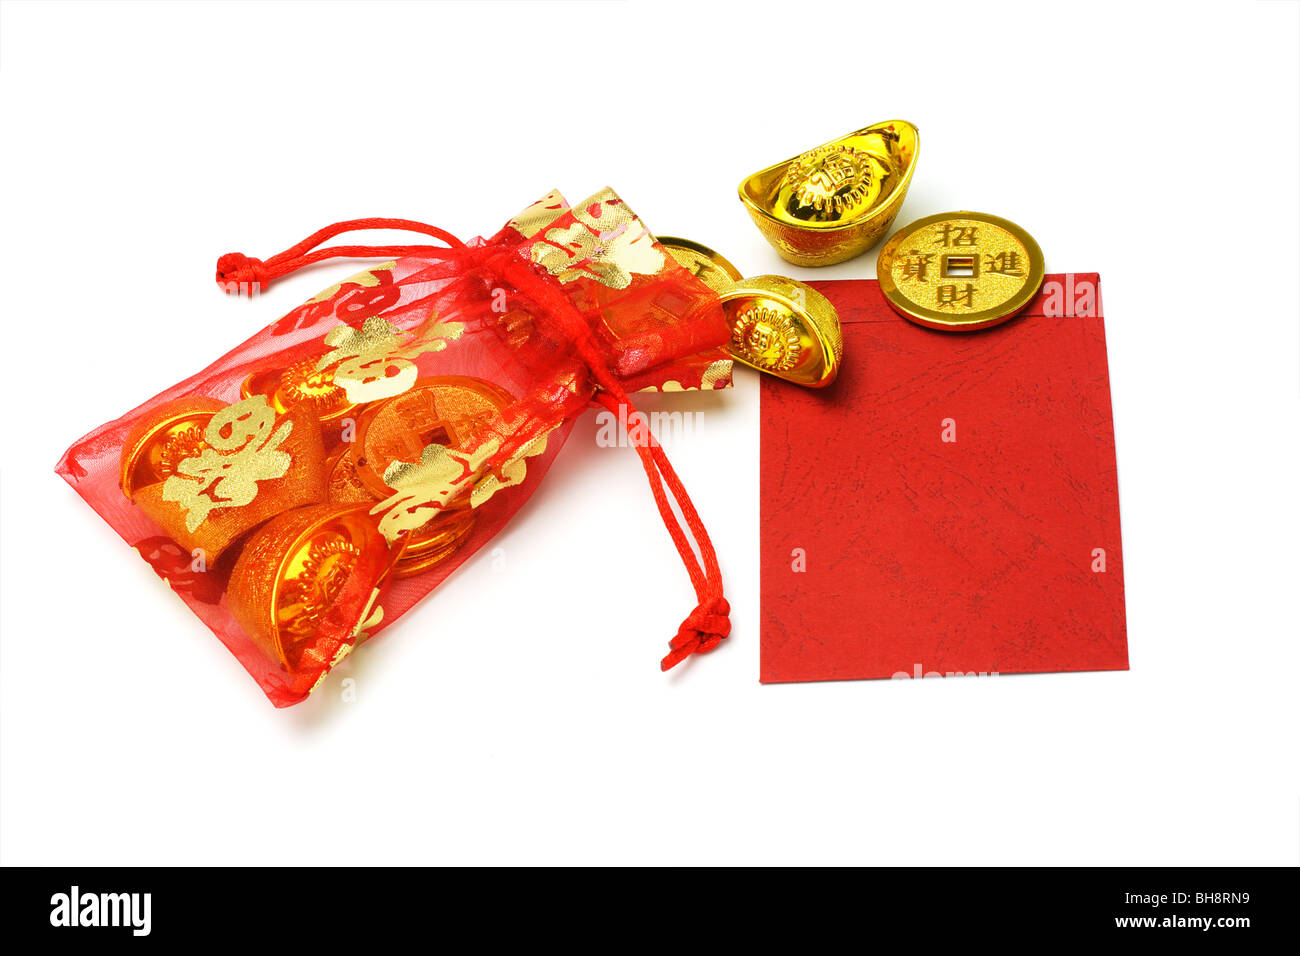 Chinese new year gold ingots and coins in red sachet and red packet on white background Stock Photo